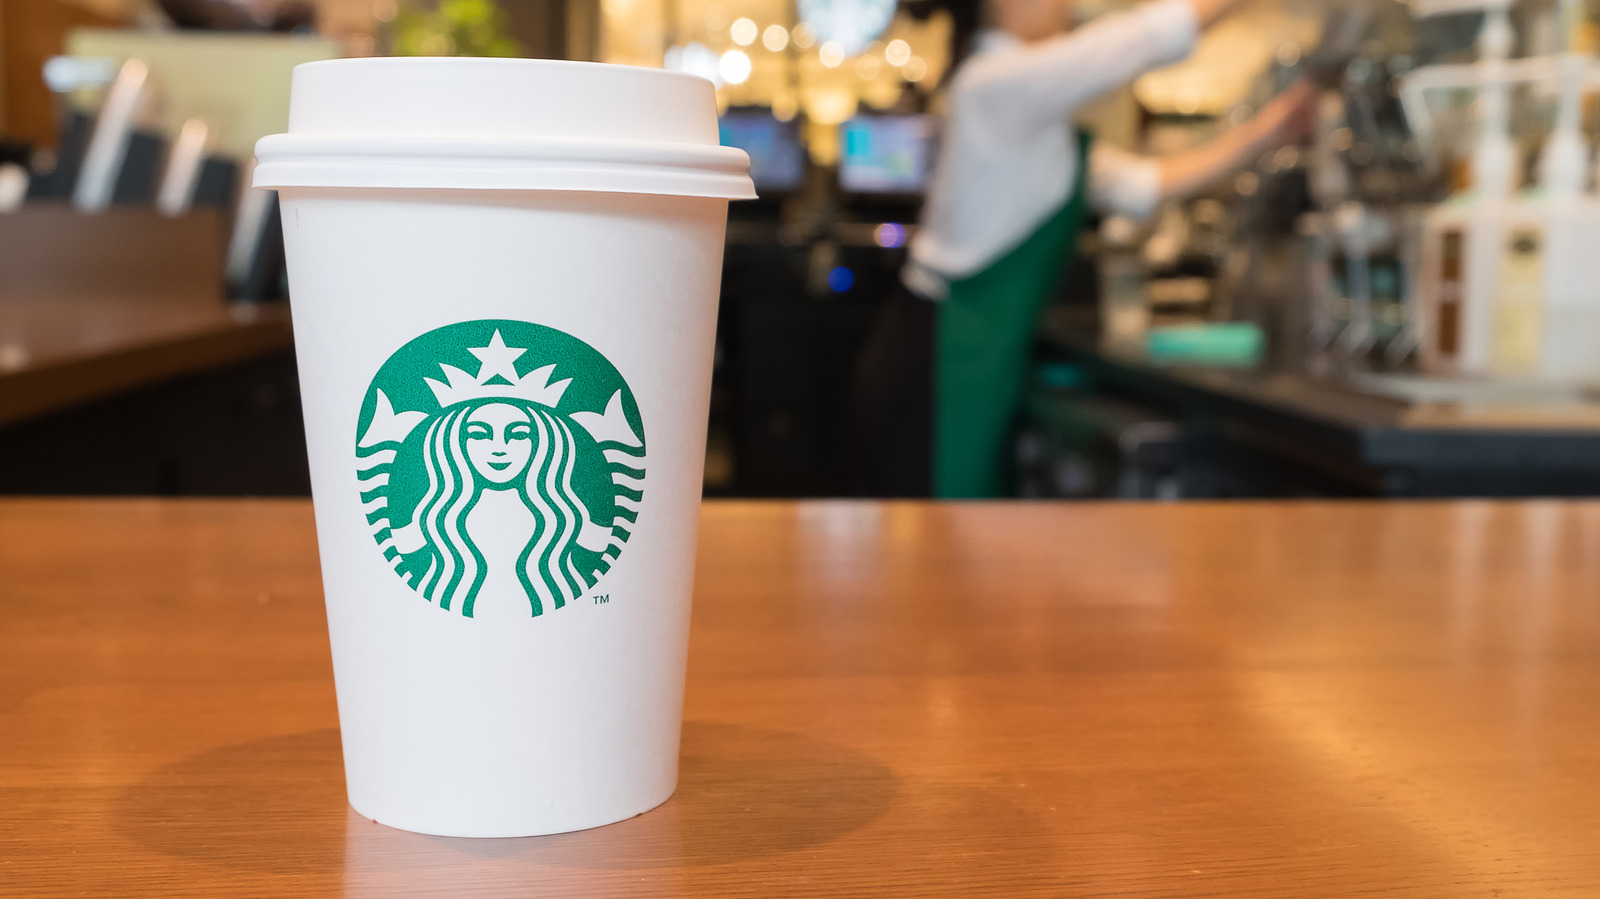 What Starbucks drink can I have while on keto?